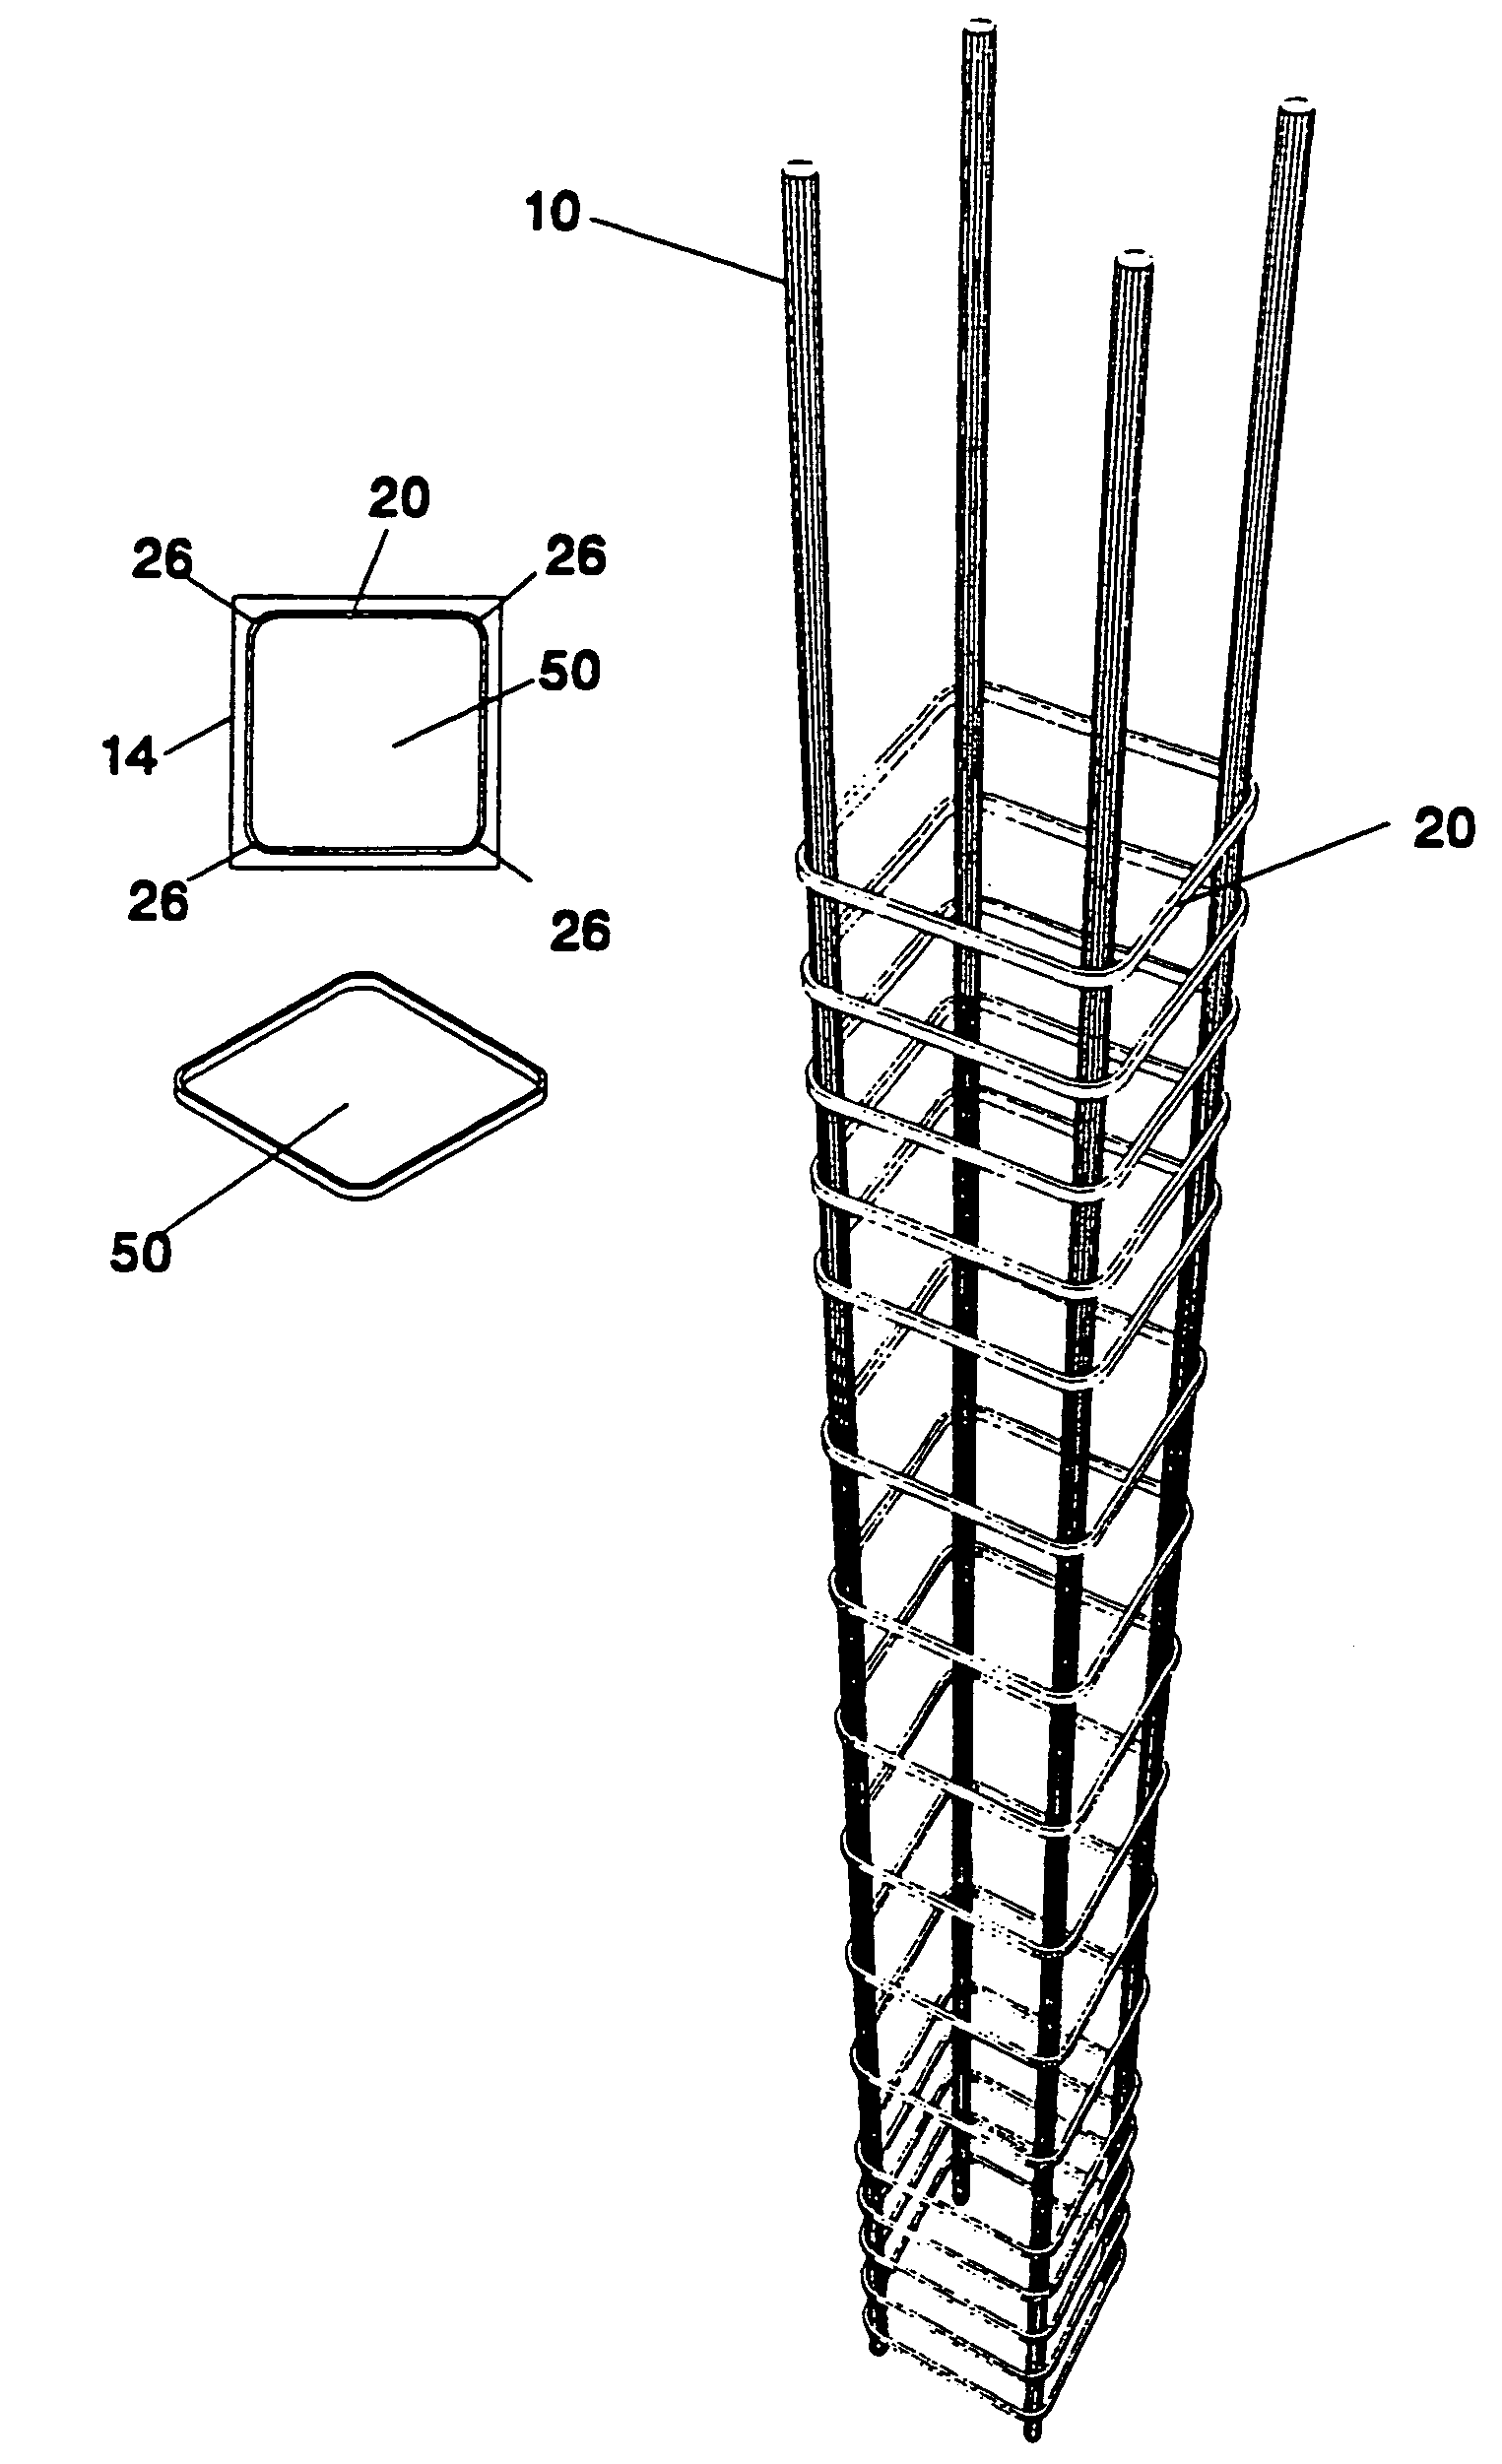 Cellular stirrups and ties for structural members